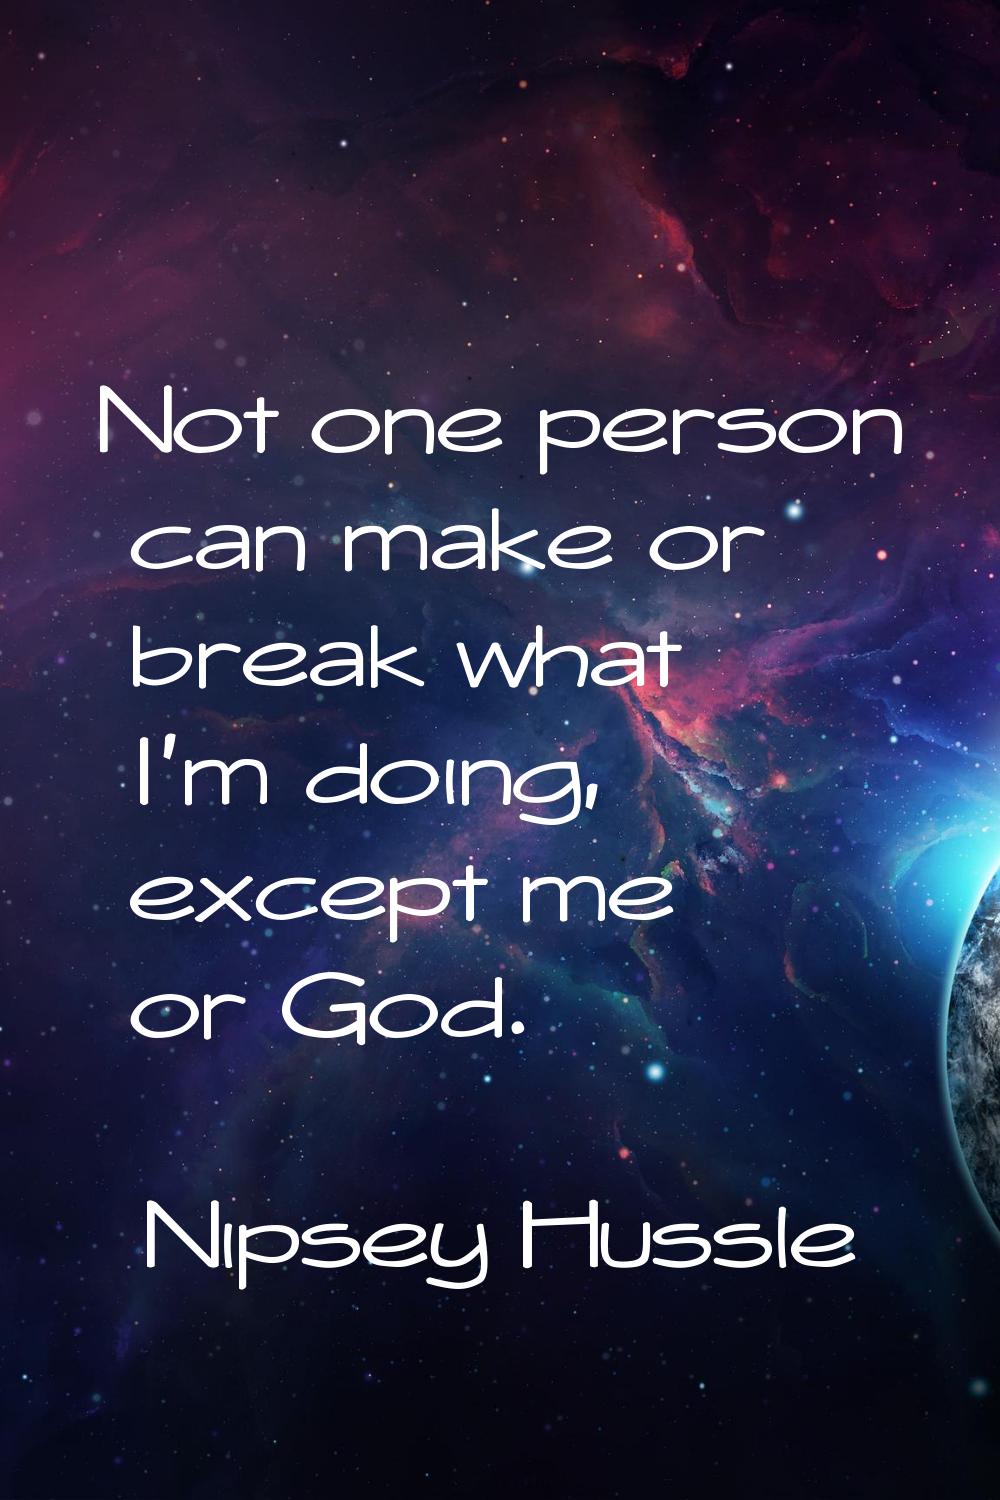 Not one person can make or break what I'm doing, except me or God.